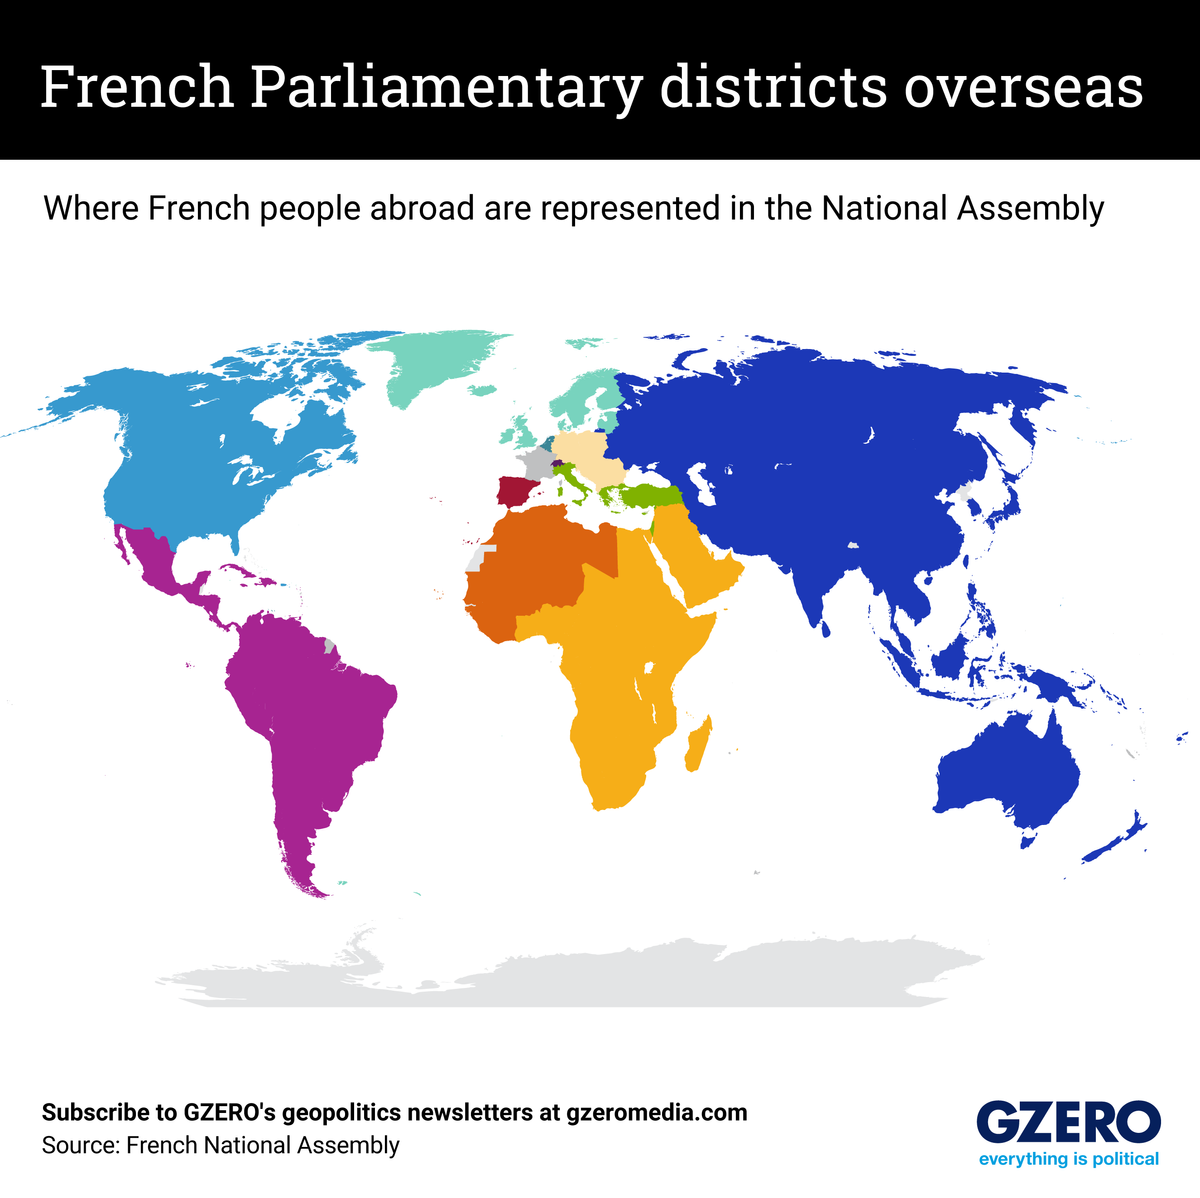 The Graphic Truth: French Parliamentary districts overseas